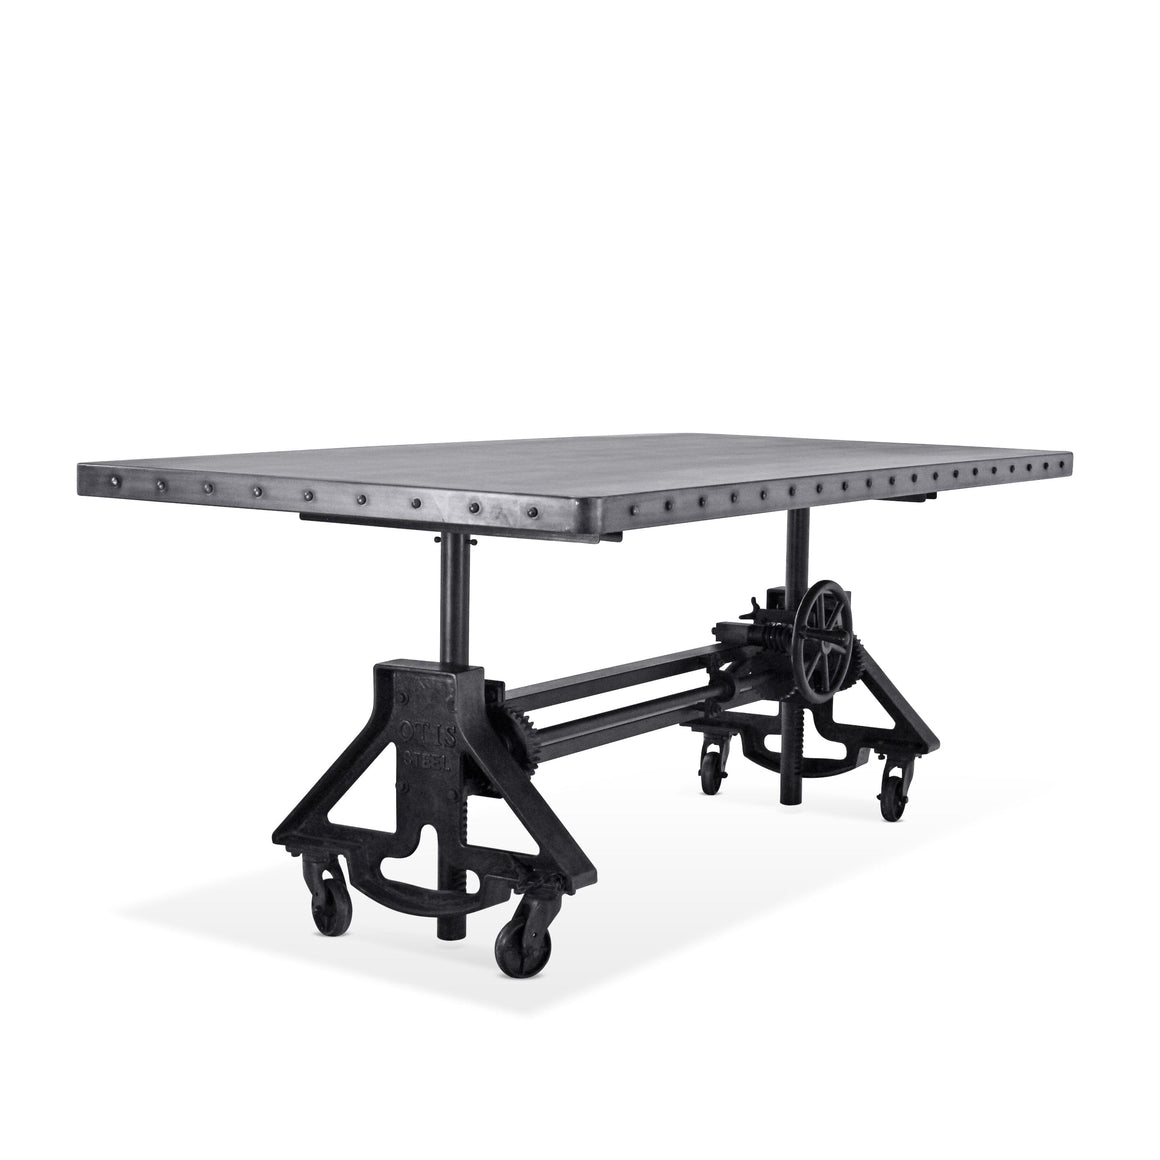 Otis Steel Dining Table - Adjustable Height - Casters - Steel Top Dining Table Rustic Deco